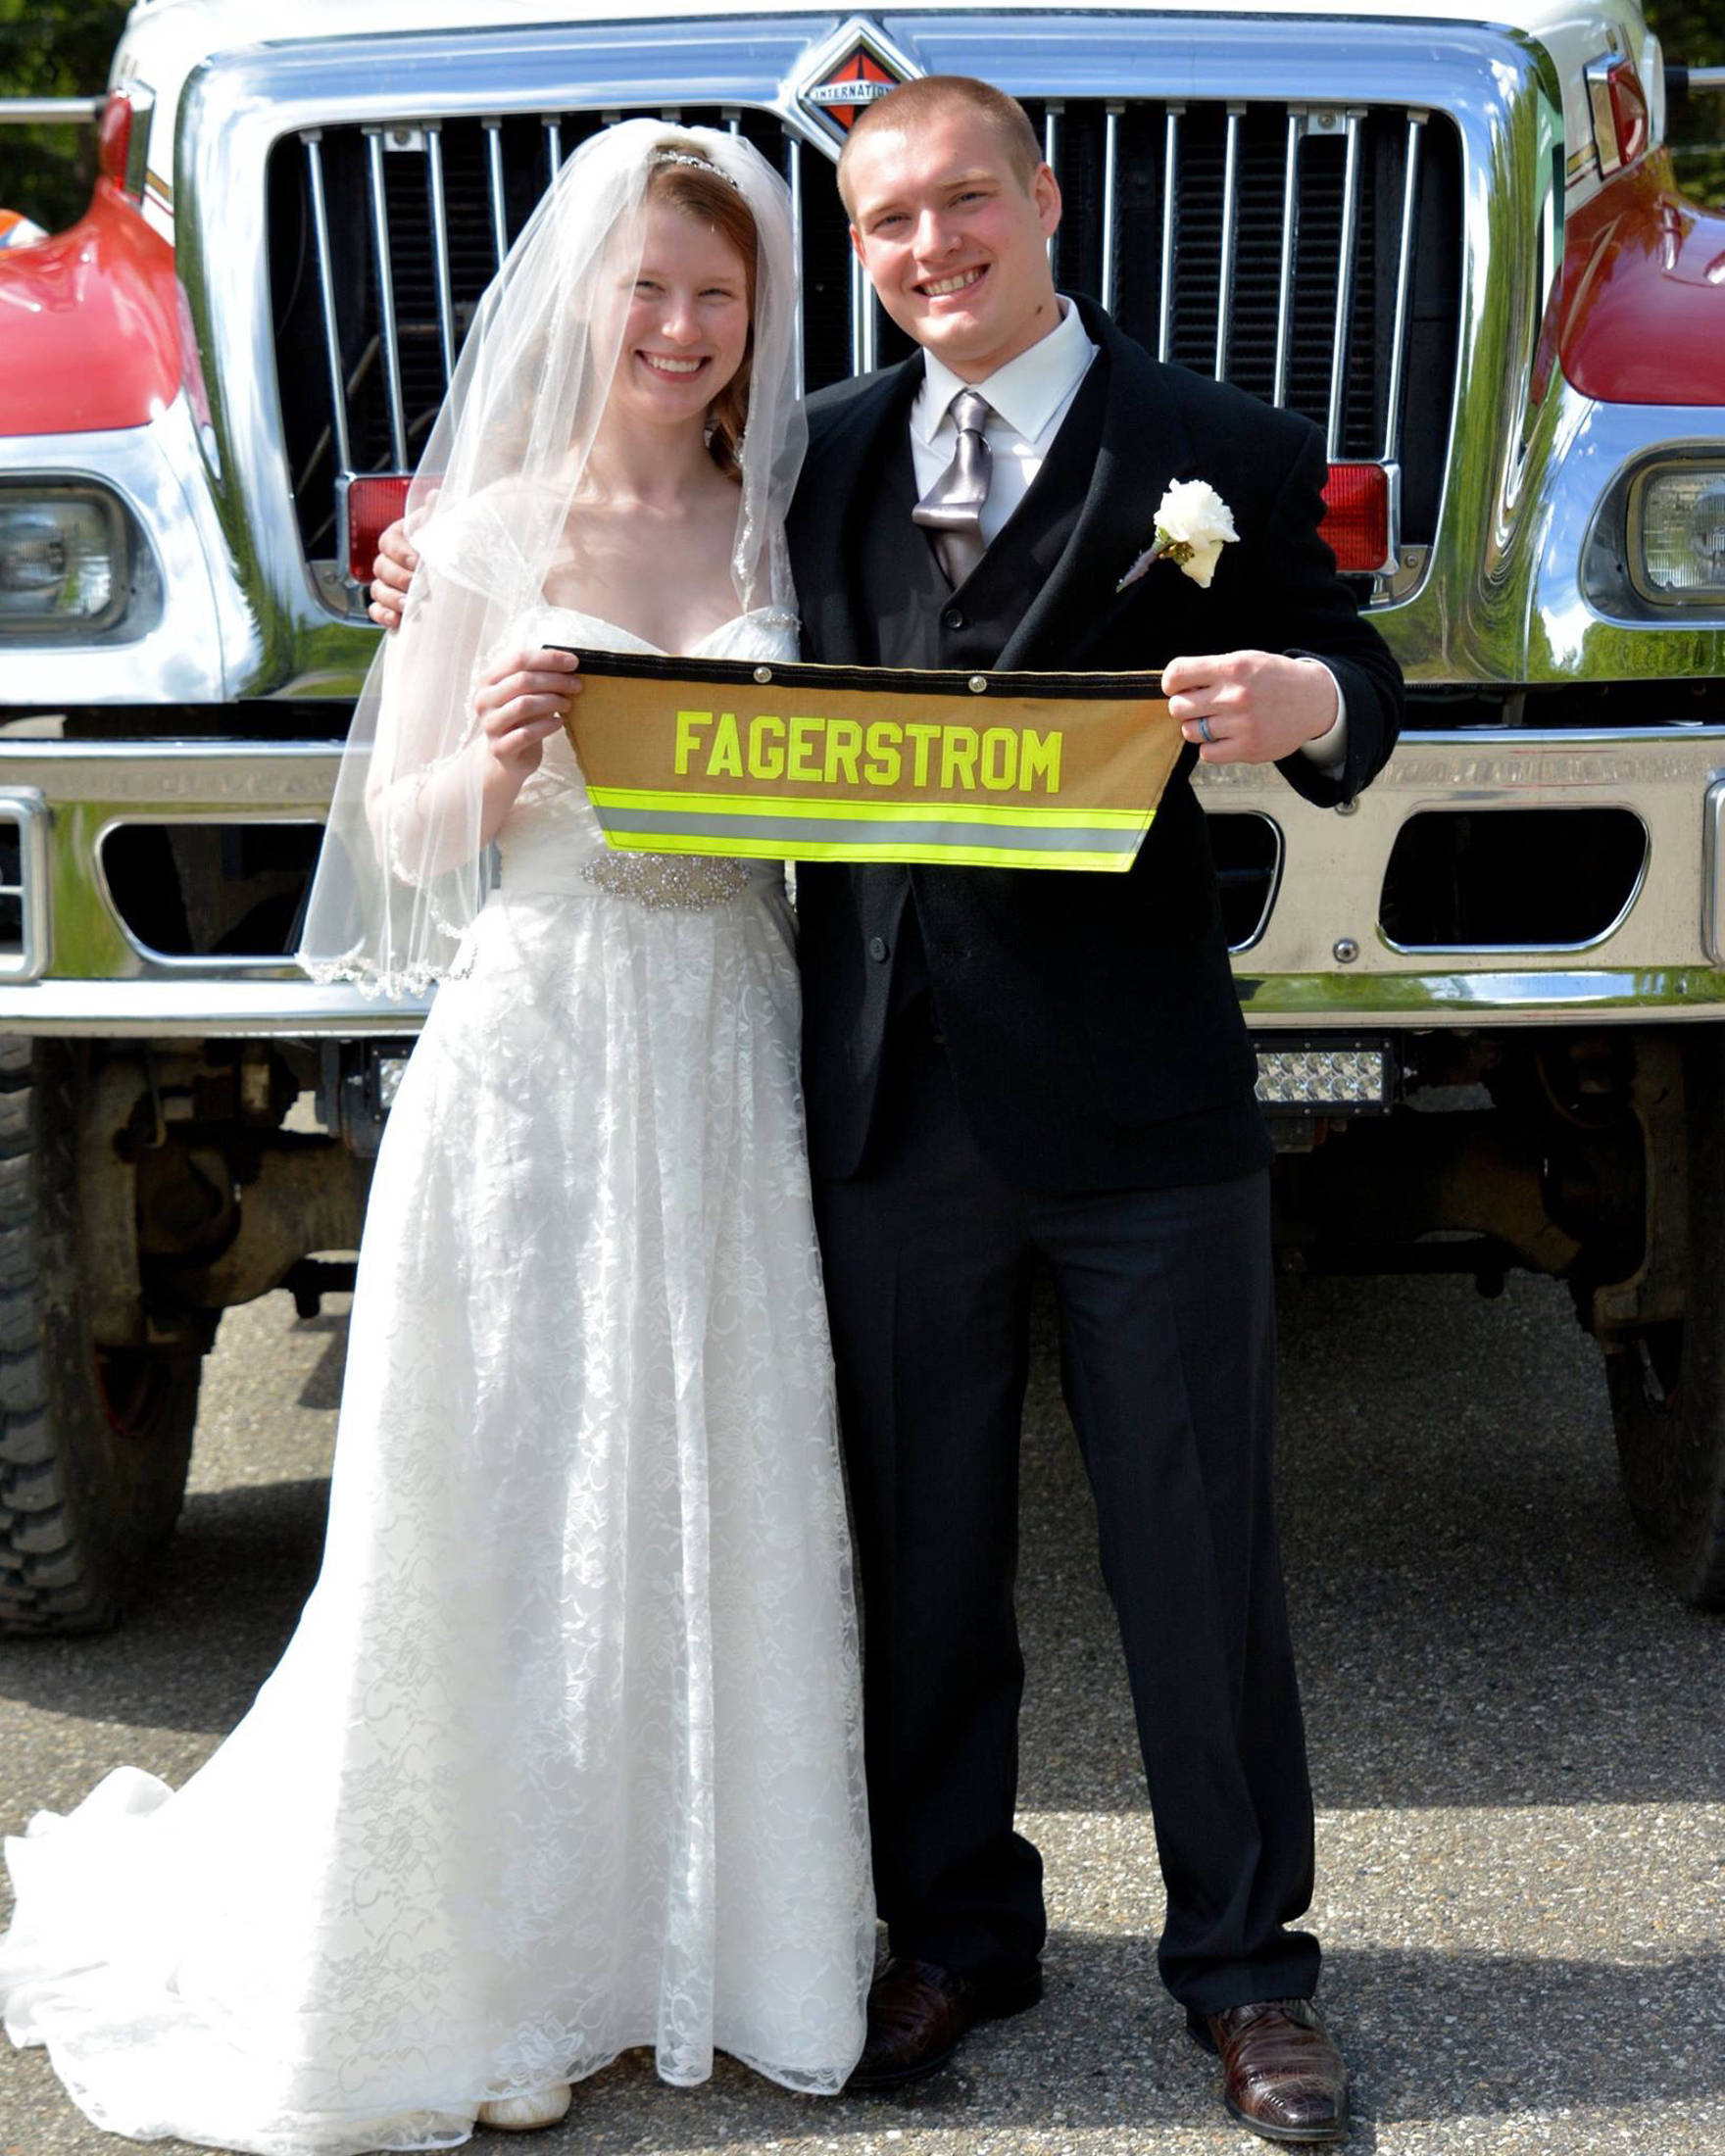 Fagerstrom, Kelley wed